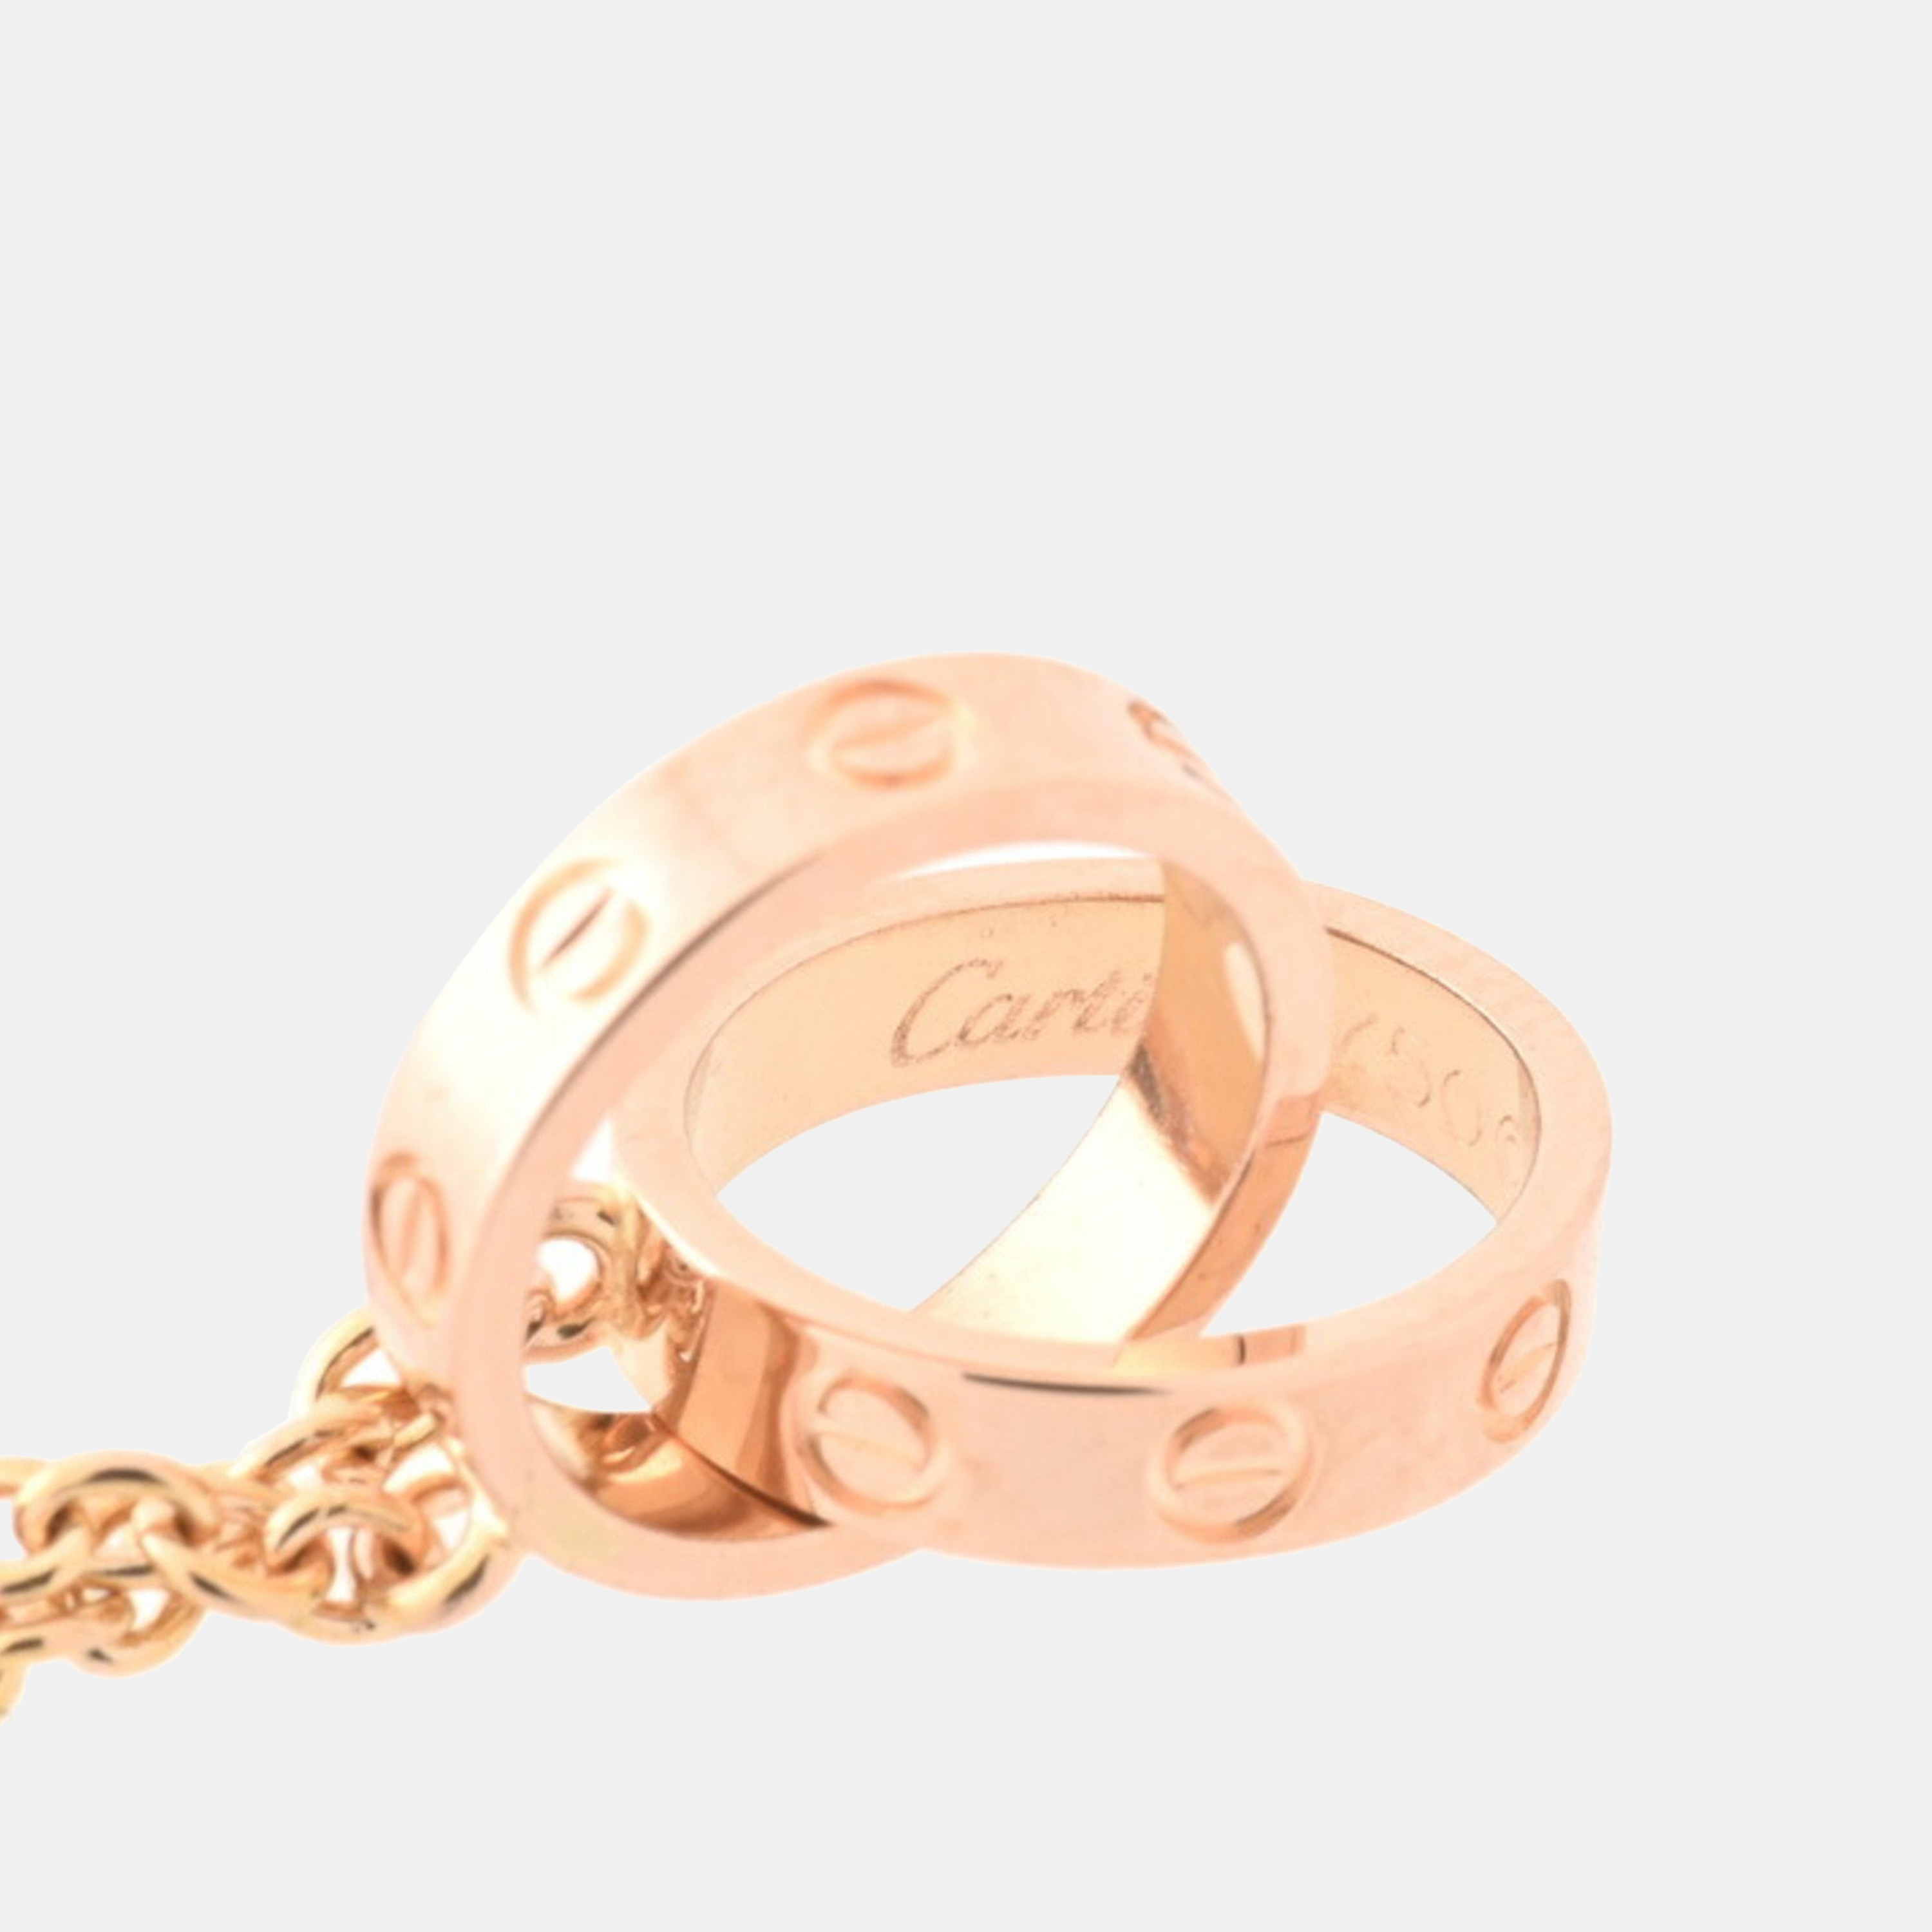 Cartier 18K Rose Gold Baby Love Pendant Necklace